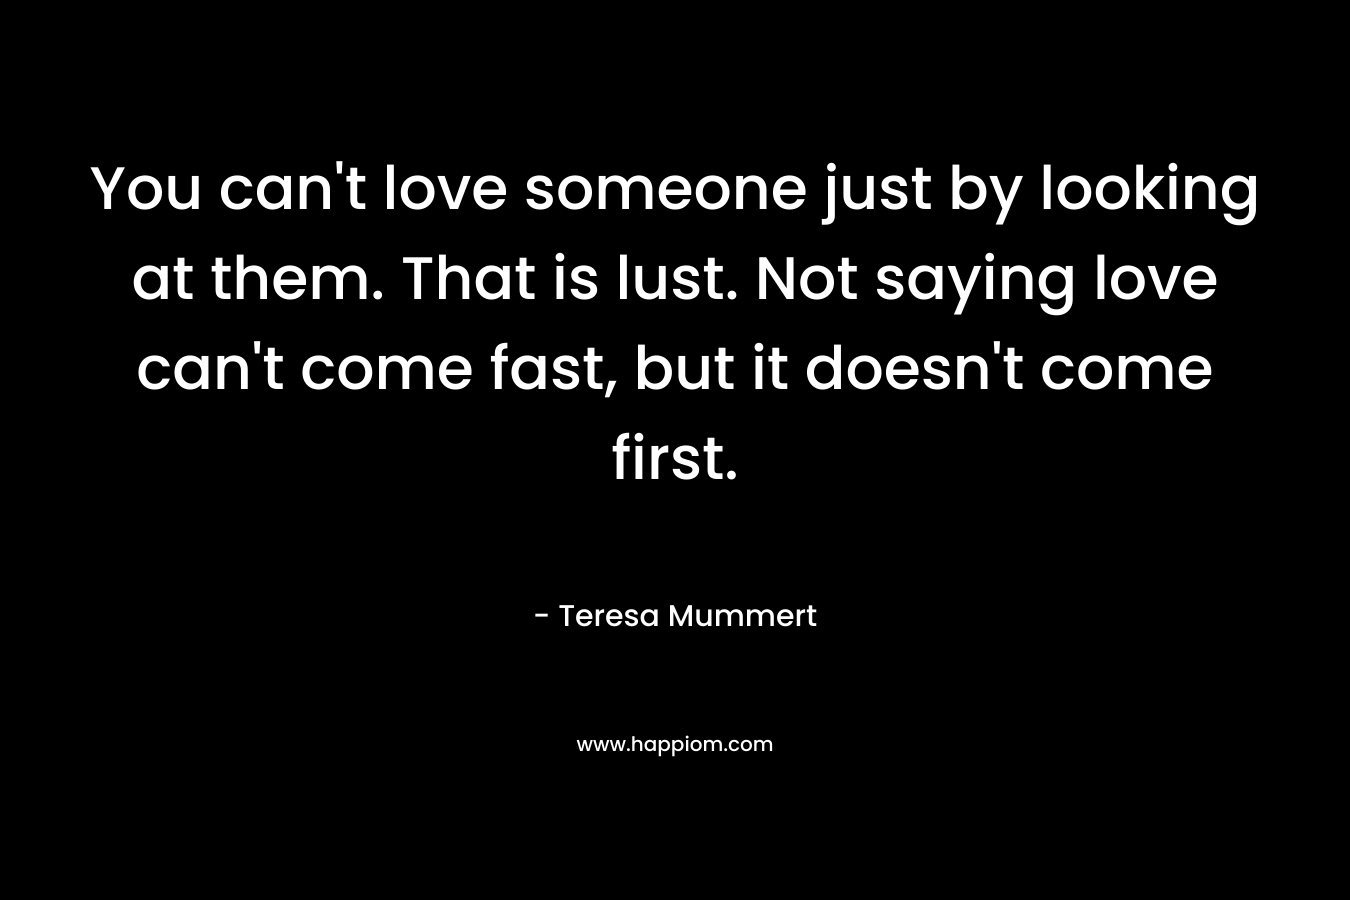 You can’t love someone just by looking at them. That is lust. Not saying love can’t come fast, but it doesn’t come first. – Teresa Mummert